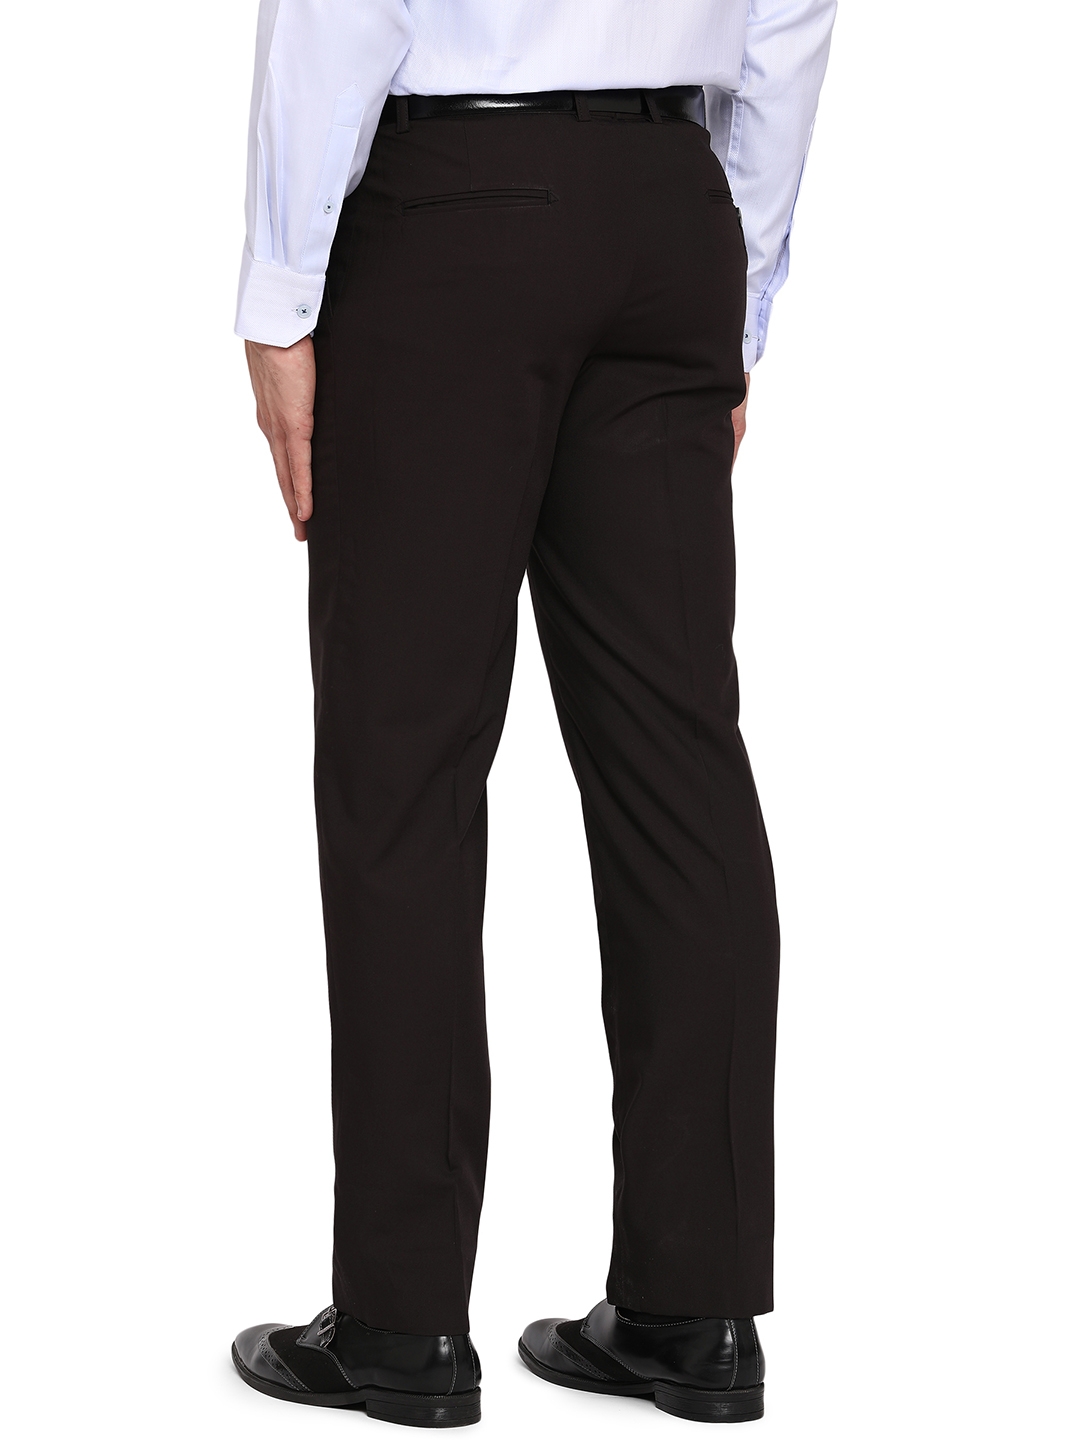 Greenfibre | Black Solid Classic Fit Formal Trouser | Greenfibre 2